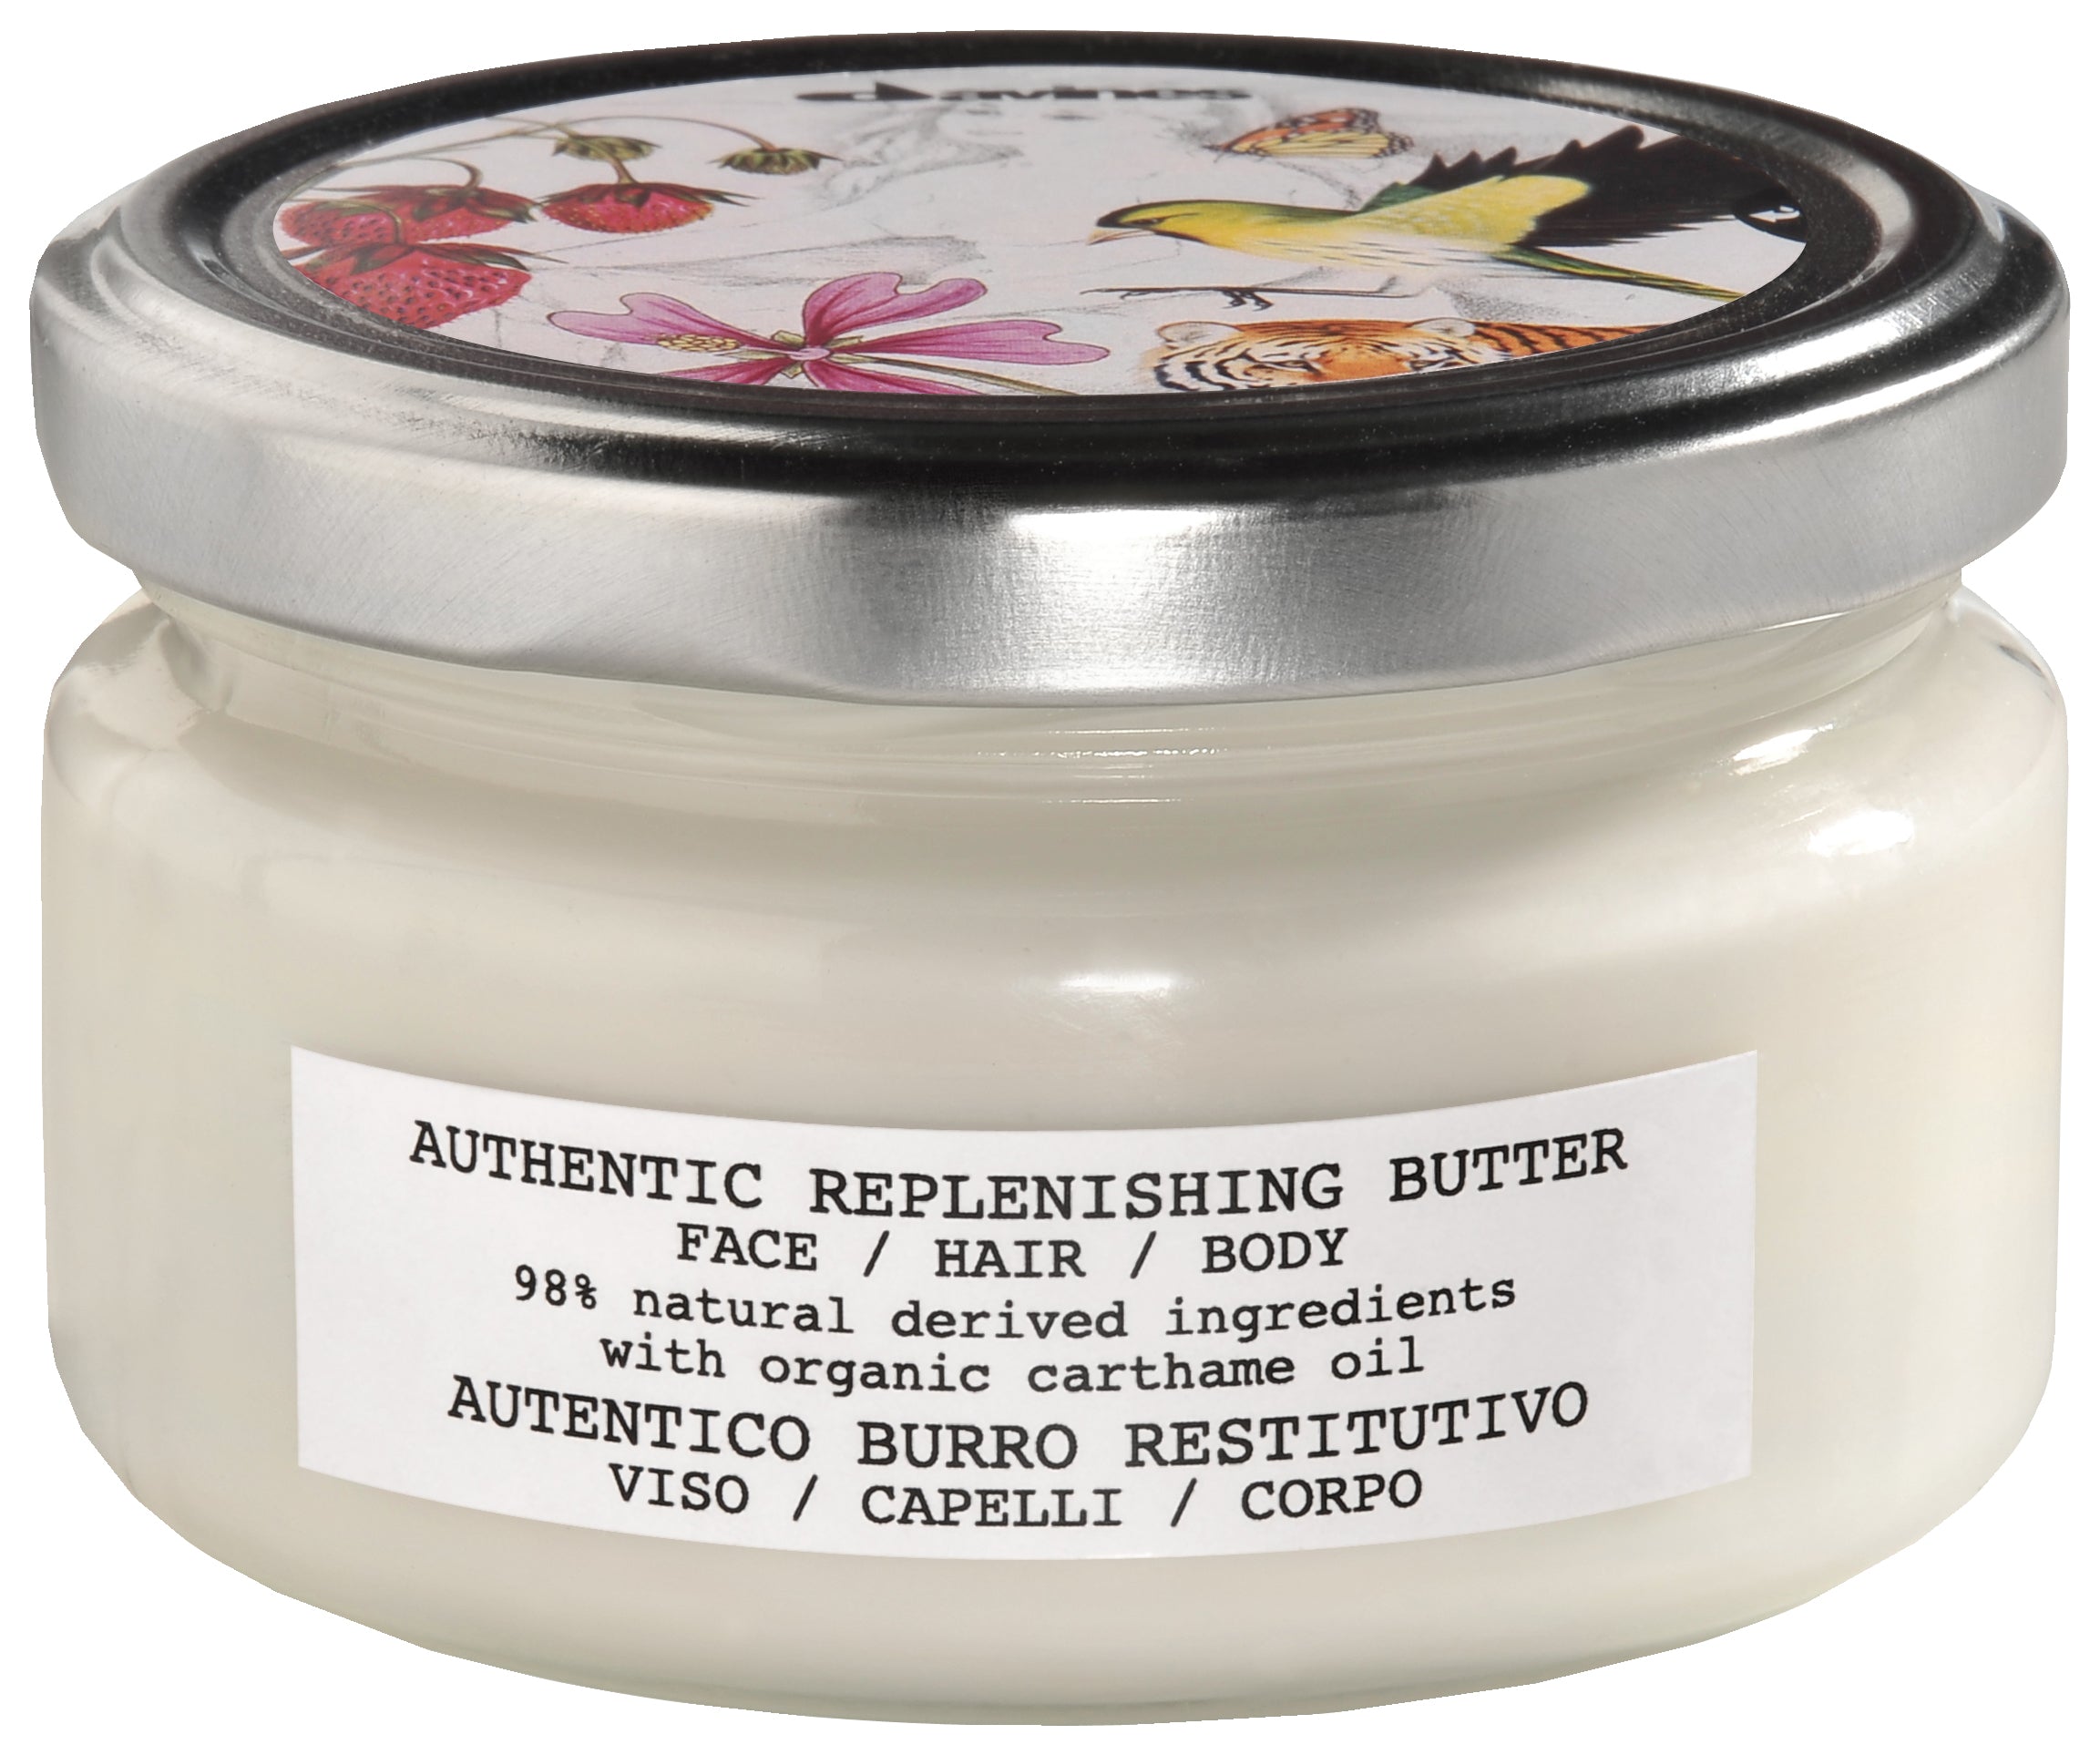 Authentic Replenishing Butter by davines